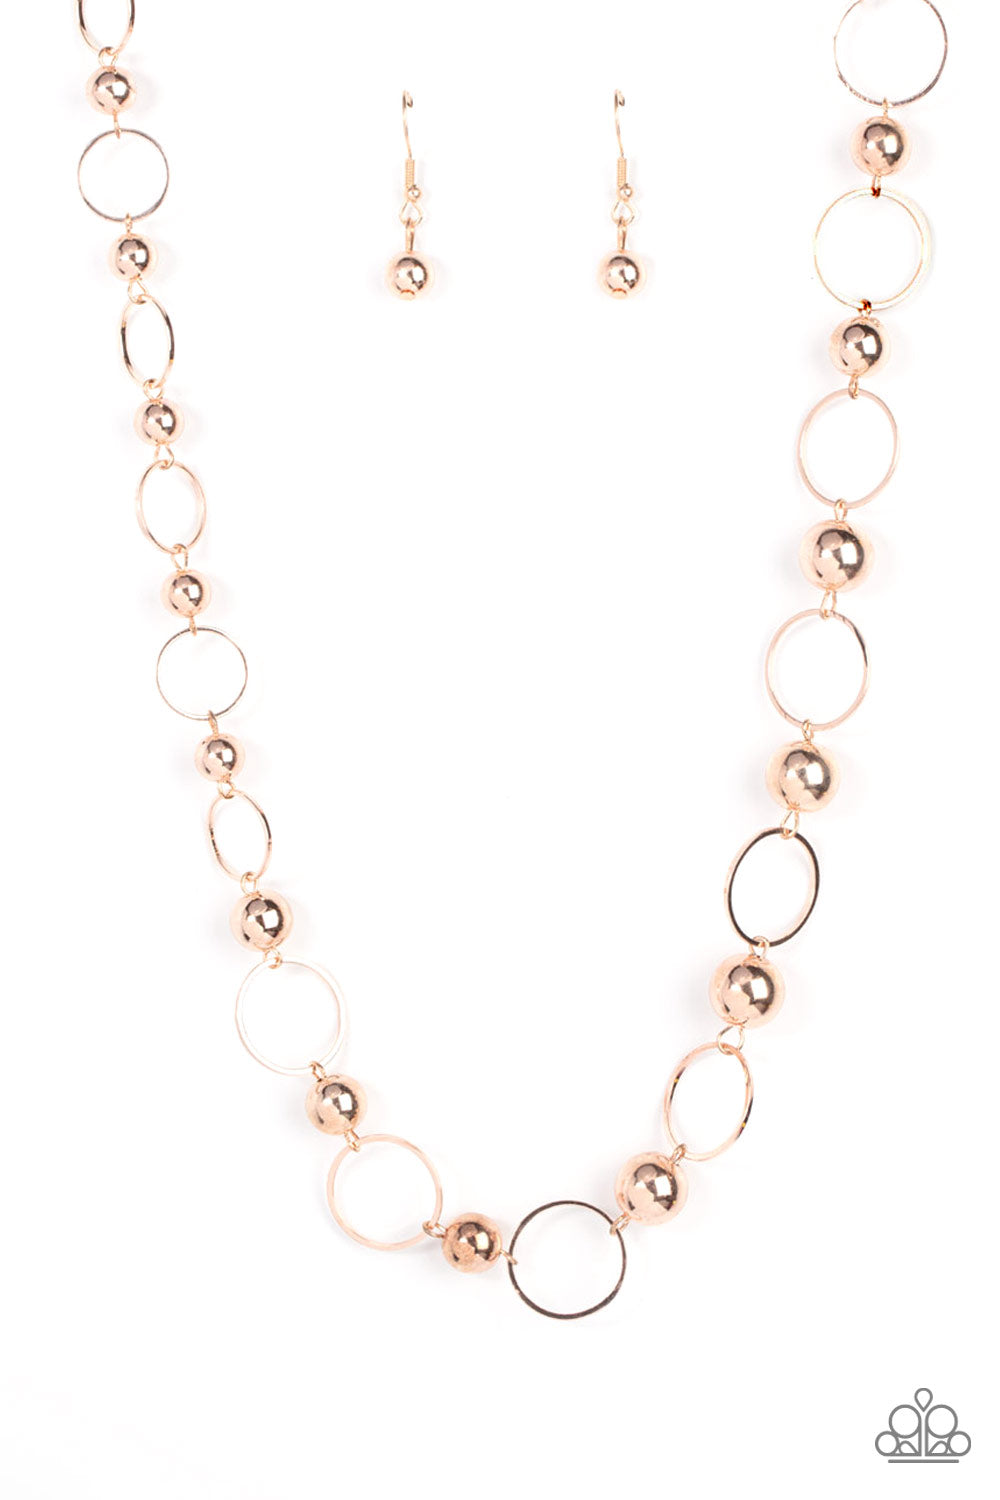 Metro Milestone Rose Gold Necklace - Paparazzi Accessories  Gradually increasing in size, a glistening collection of rose gold beads and rose gold hoops alternate across the chest for a classic metallic fashion. Features an adjustable clasp closure.  Sold as one individual necklace. Includes one pair of matching earrings.